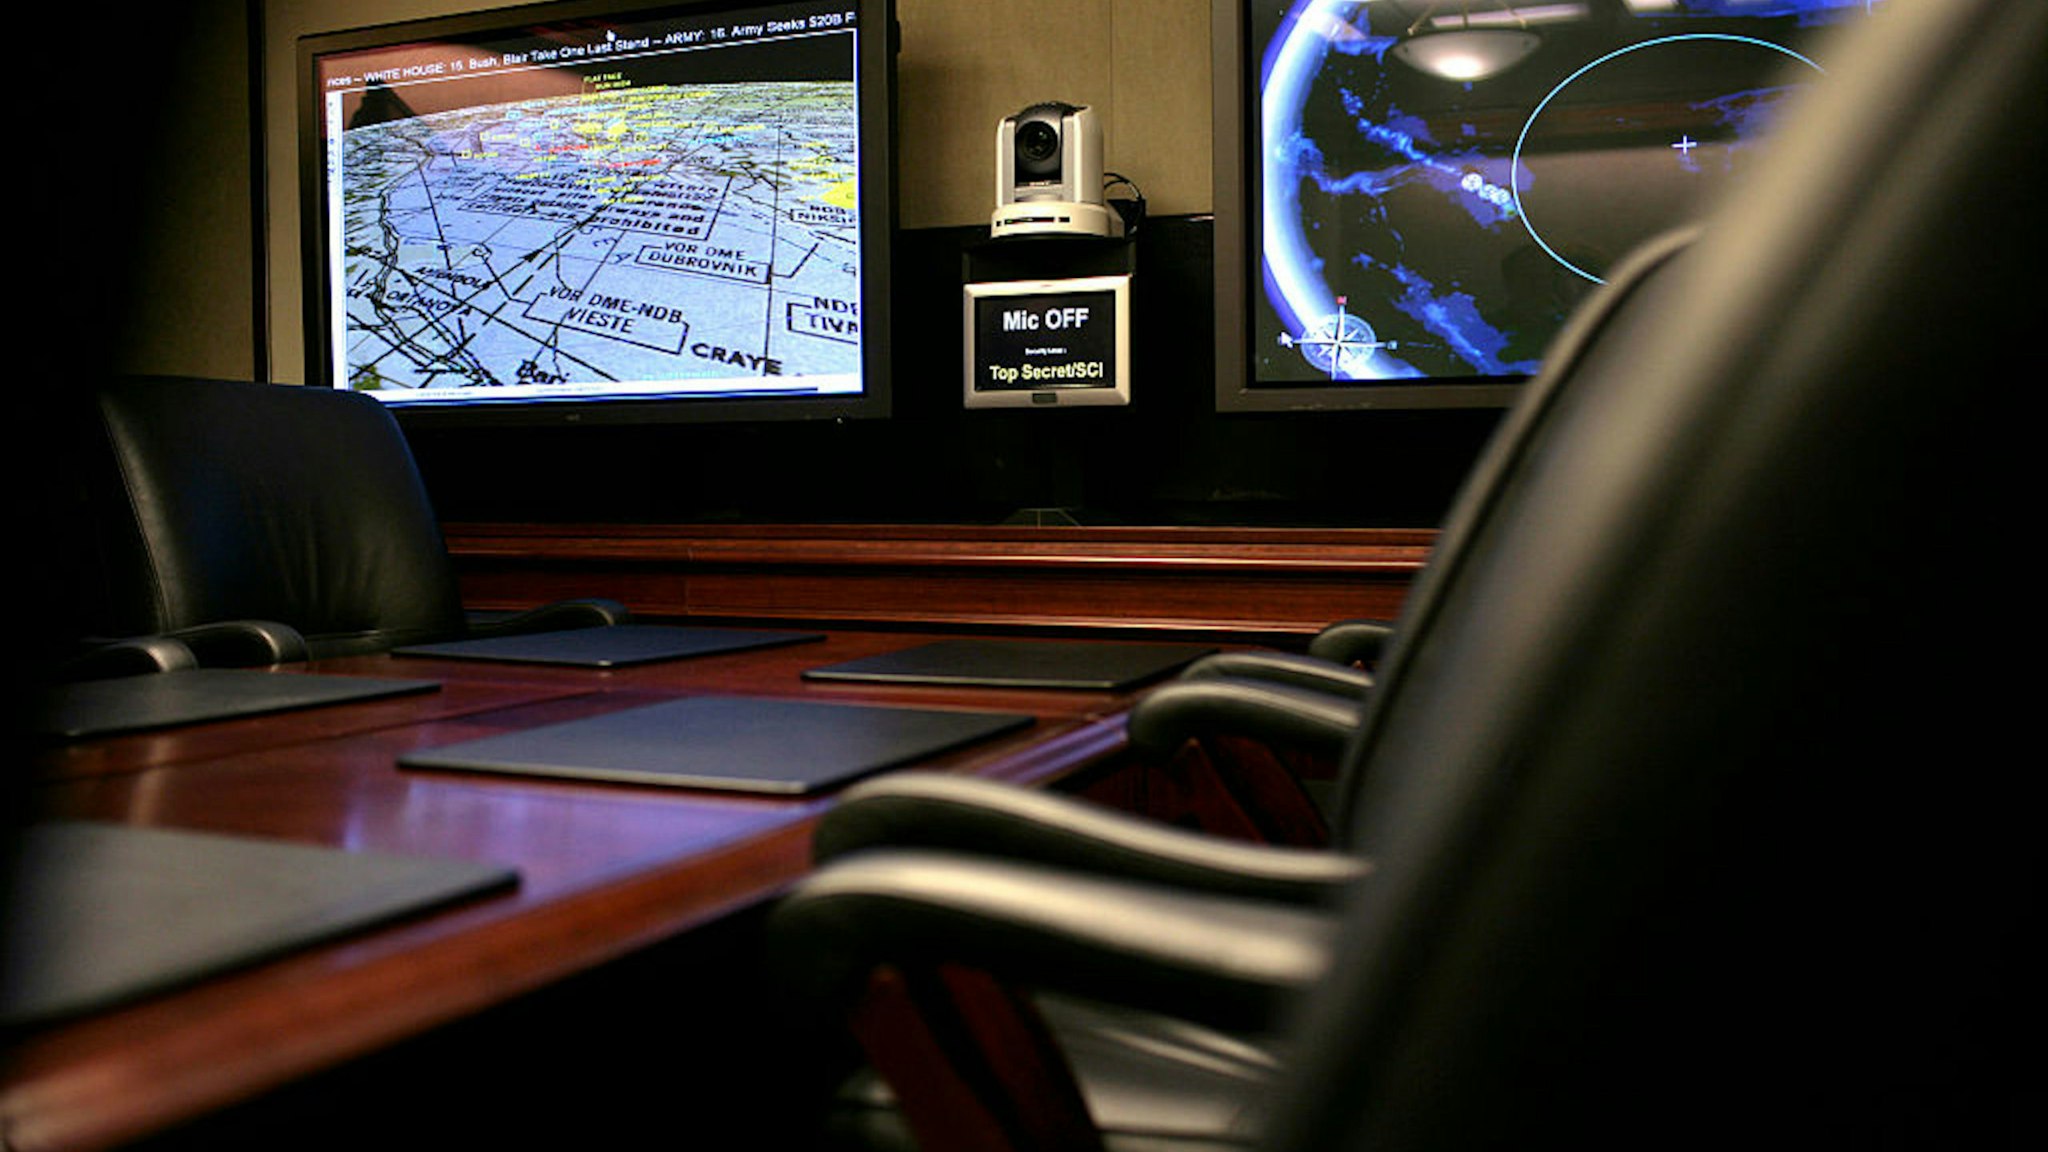 Inside the Situation Room at the White House in Washington, DC.